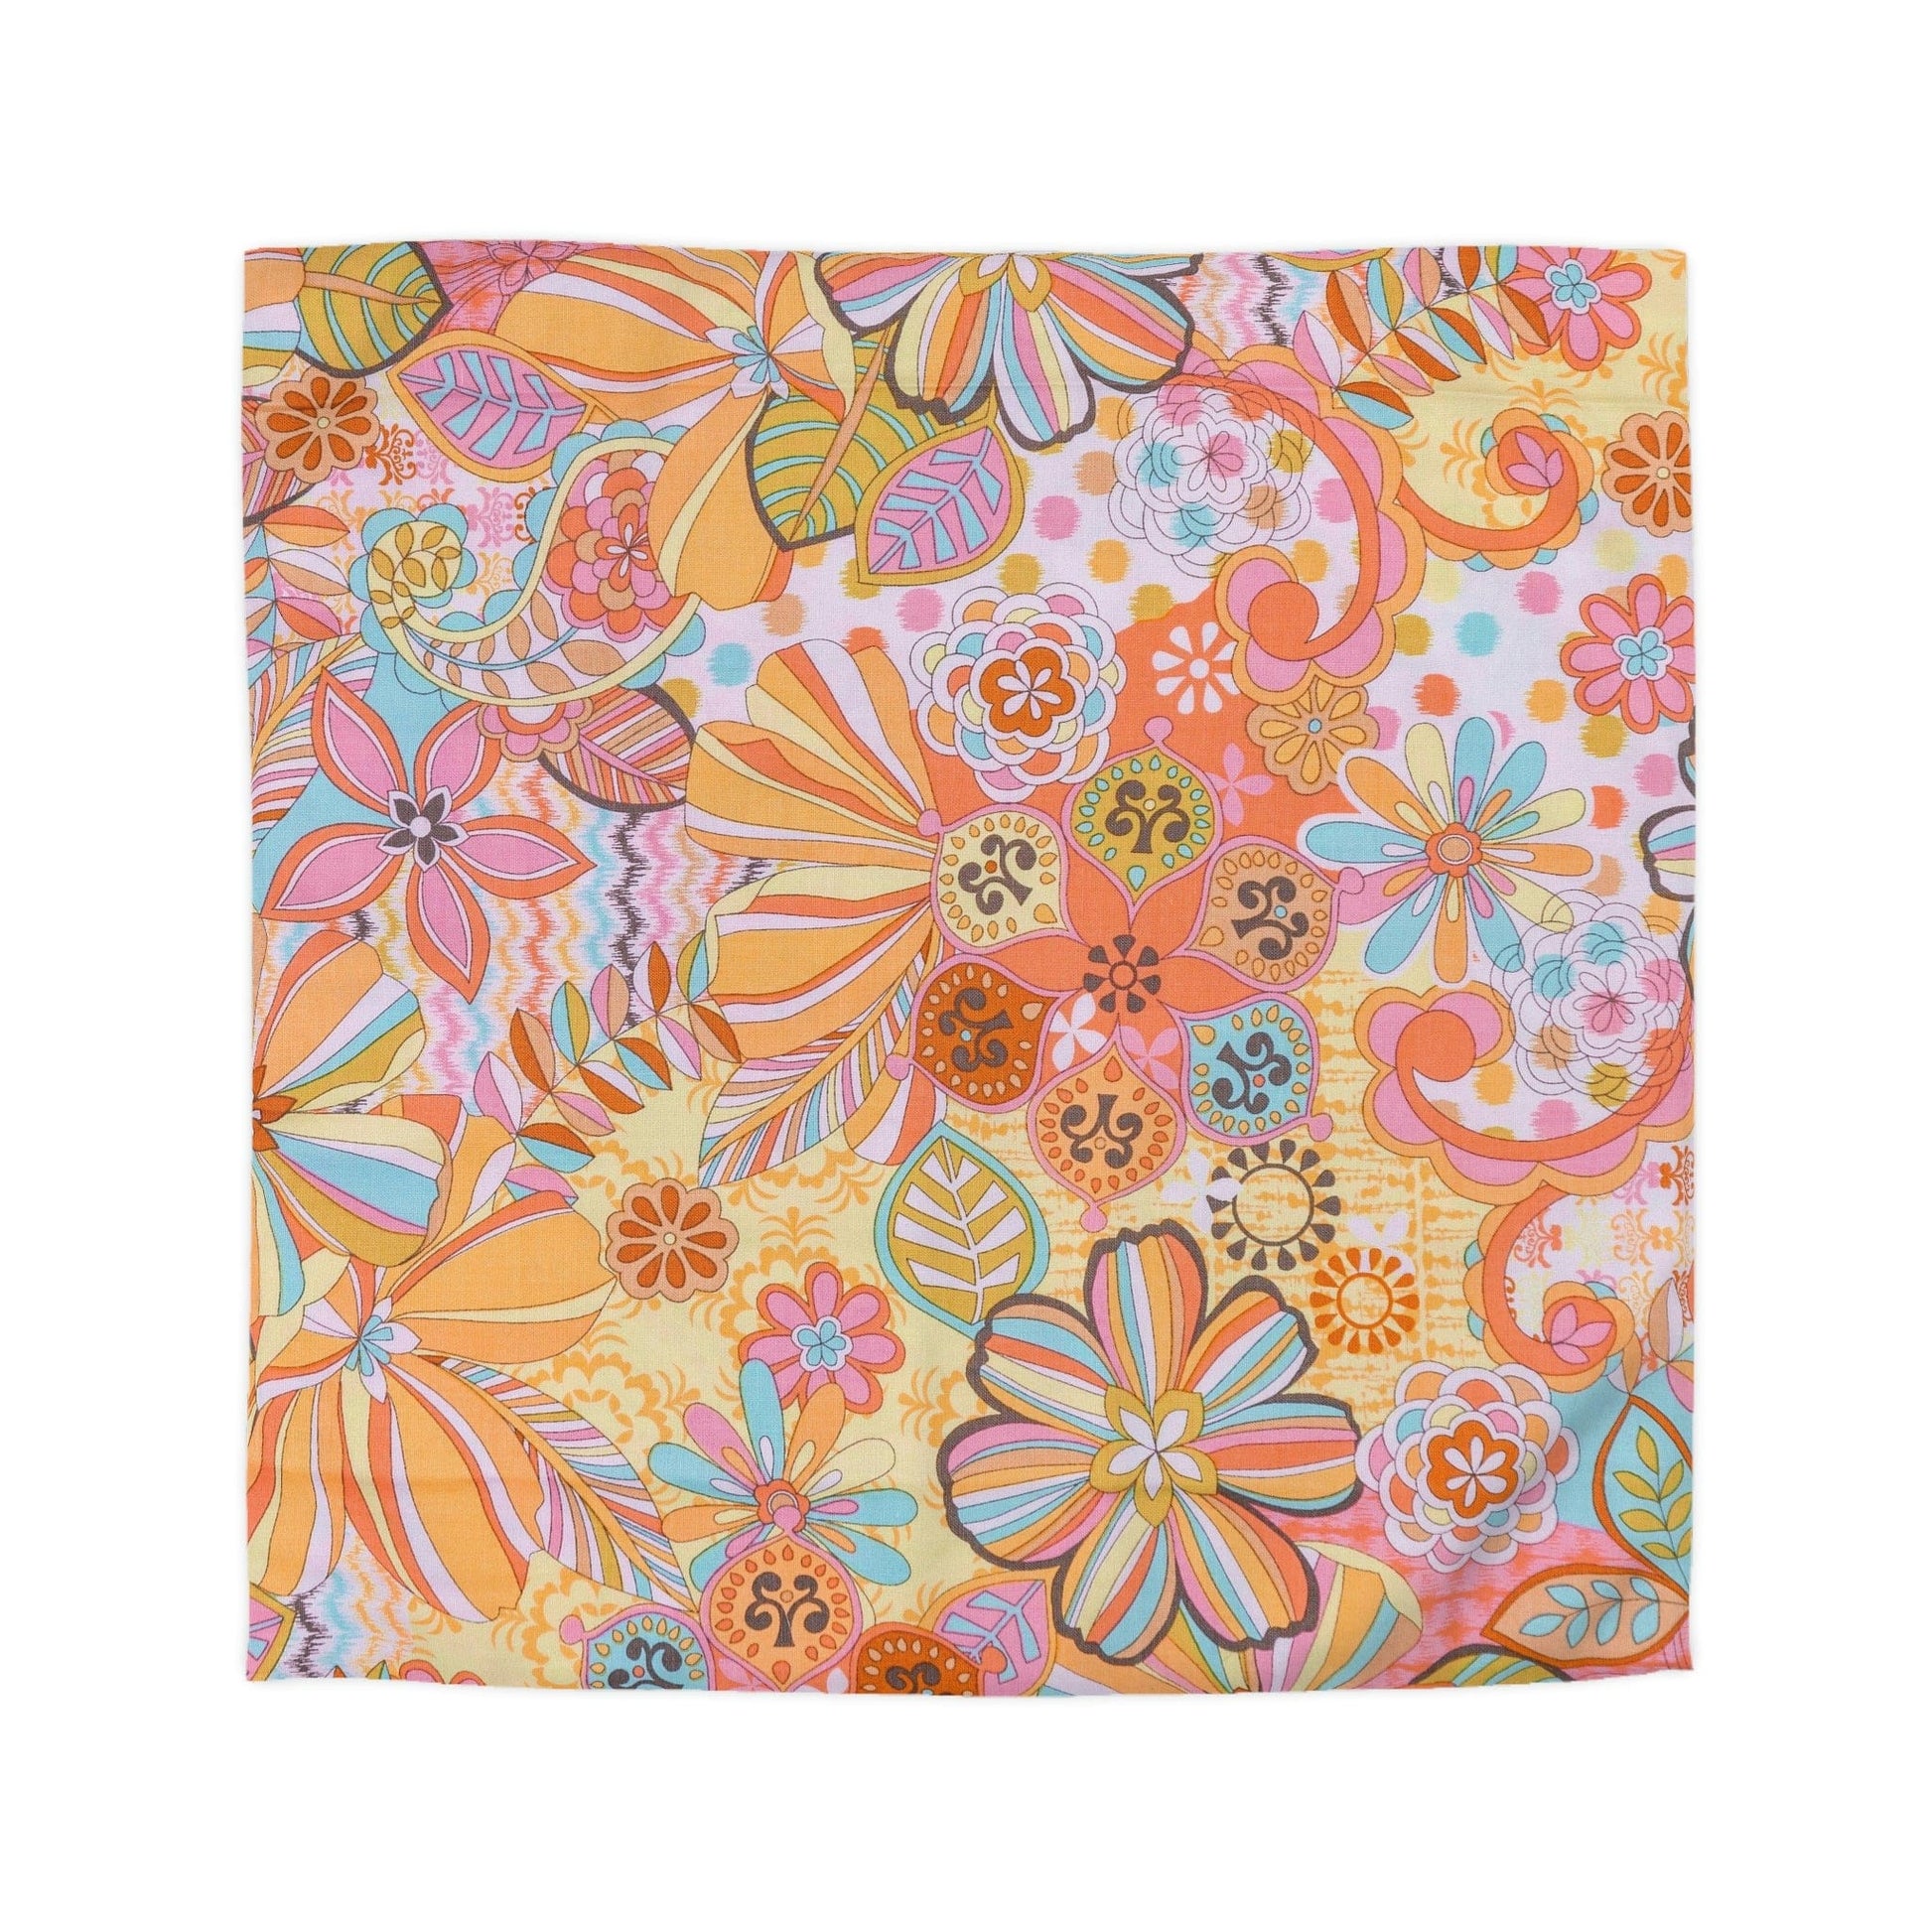 Kate McEnroe New York Retro Trippy Flower Power Duvet Cover, 70s Mid Mod Hippie Chic Floral Bedroom Decor with Groovy Orange, Yellow, and Blue Palette Duvet Covers Queen / Cream 84589177089189936786